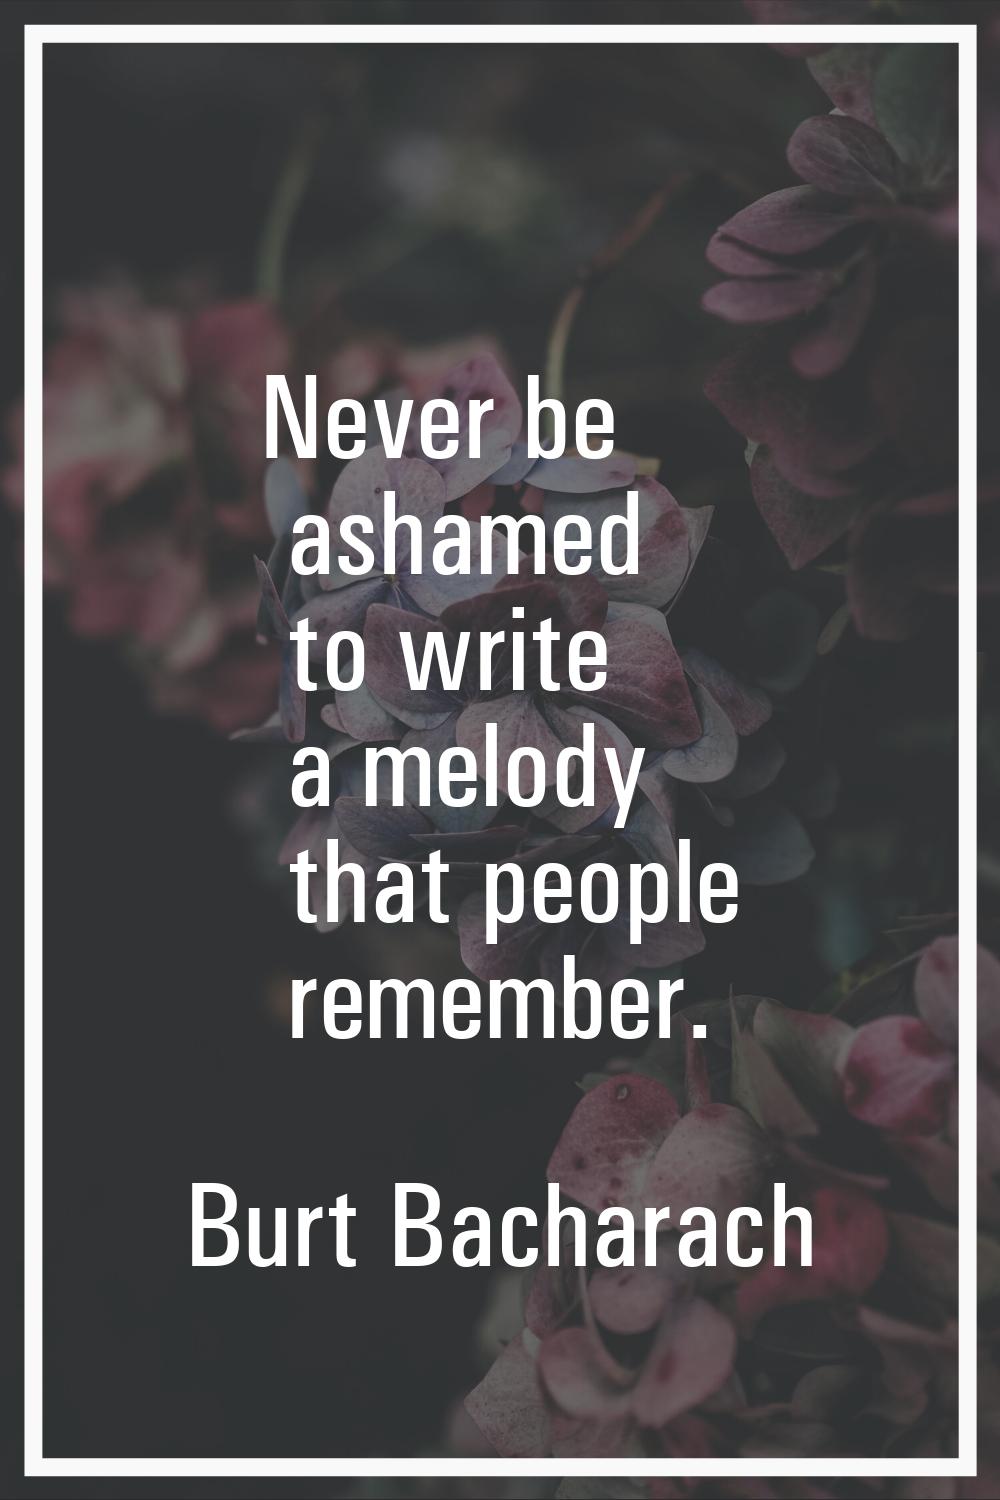 Never be ashamed to write a melody that people remember.